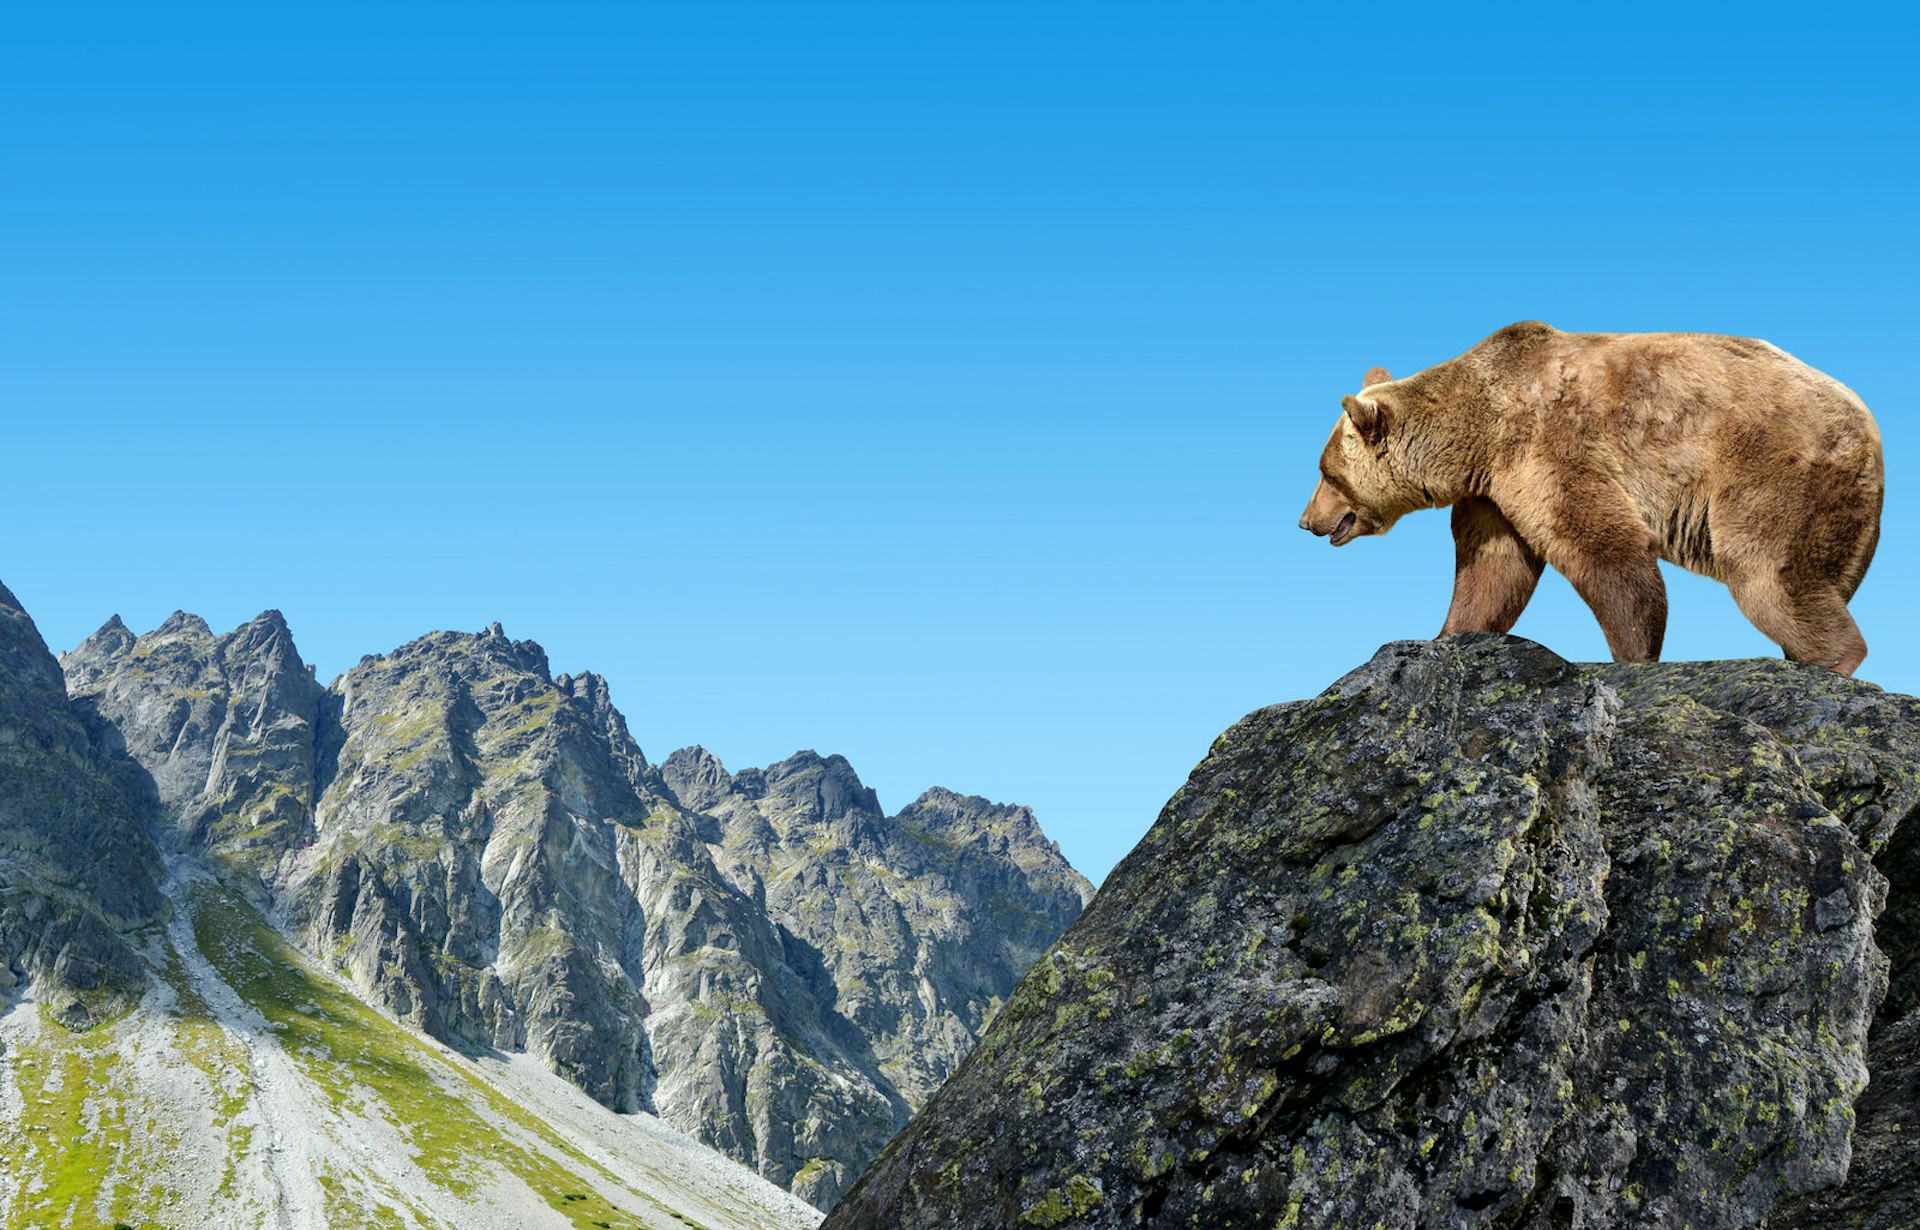 A brown bear stands on a rock in the foreground, with craggy peaks visible beyond